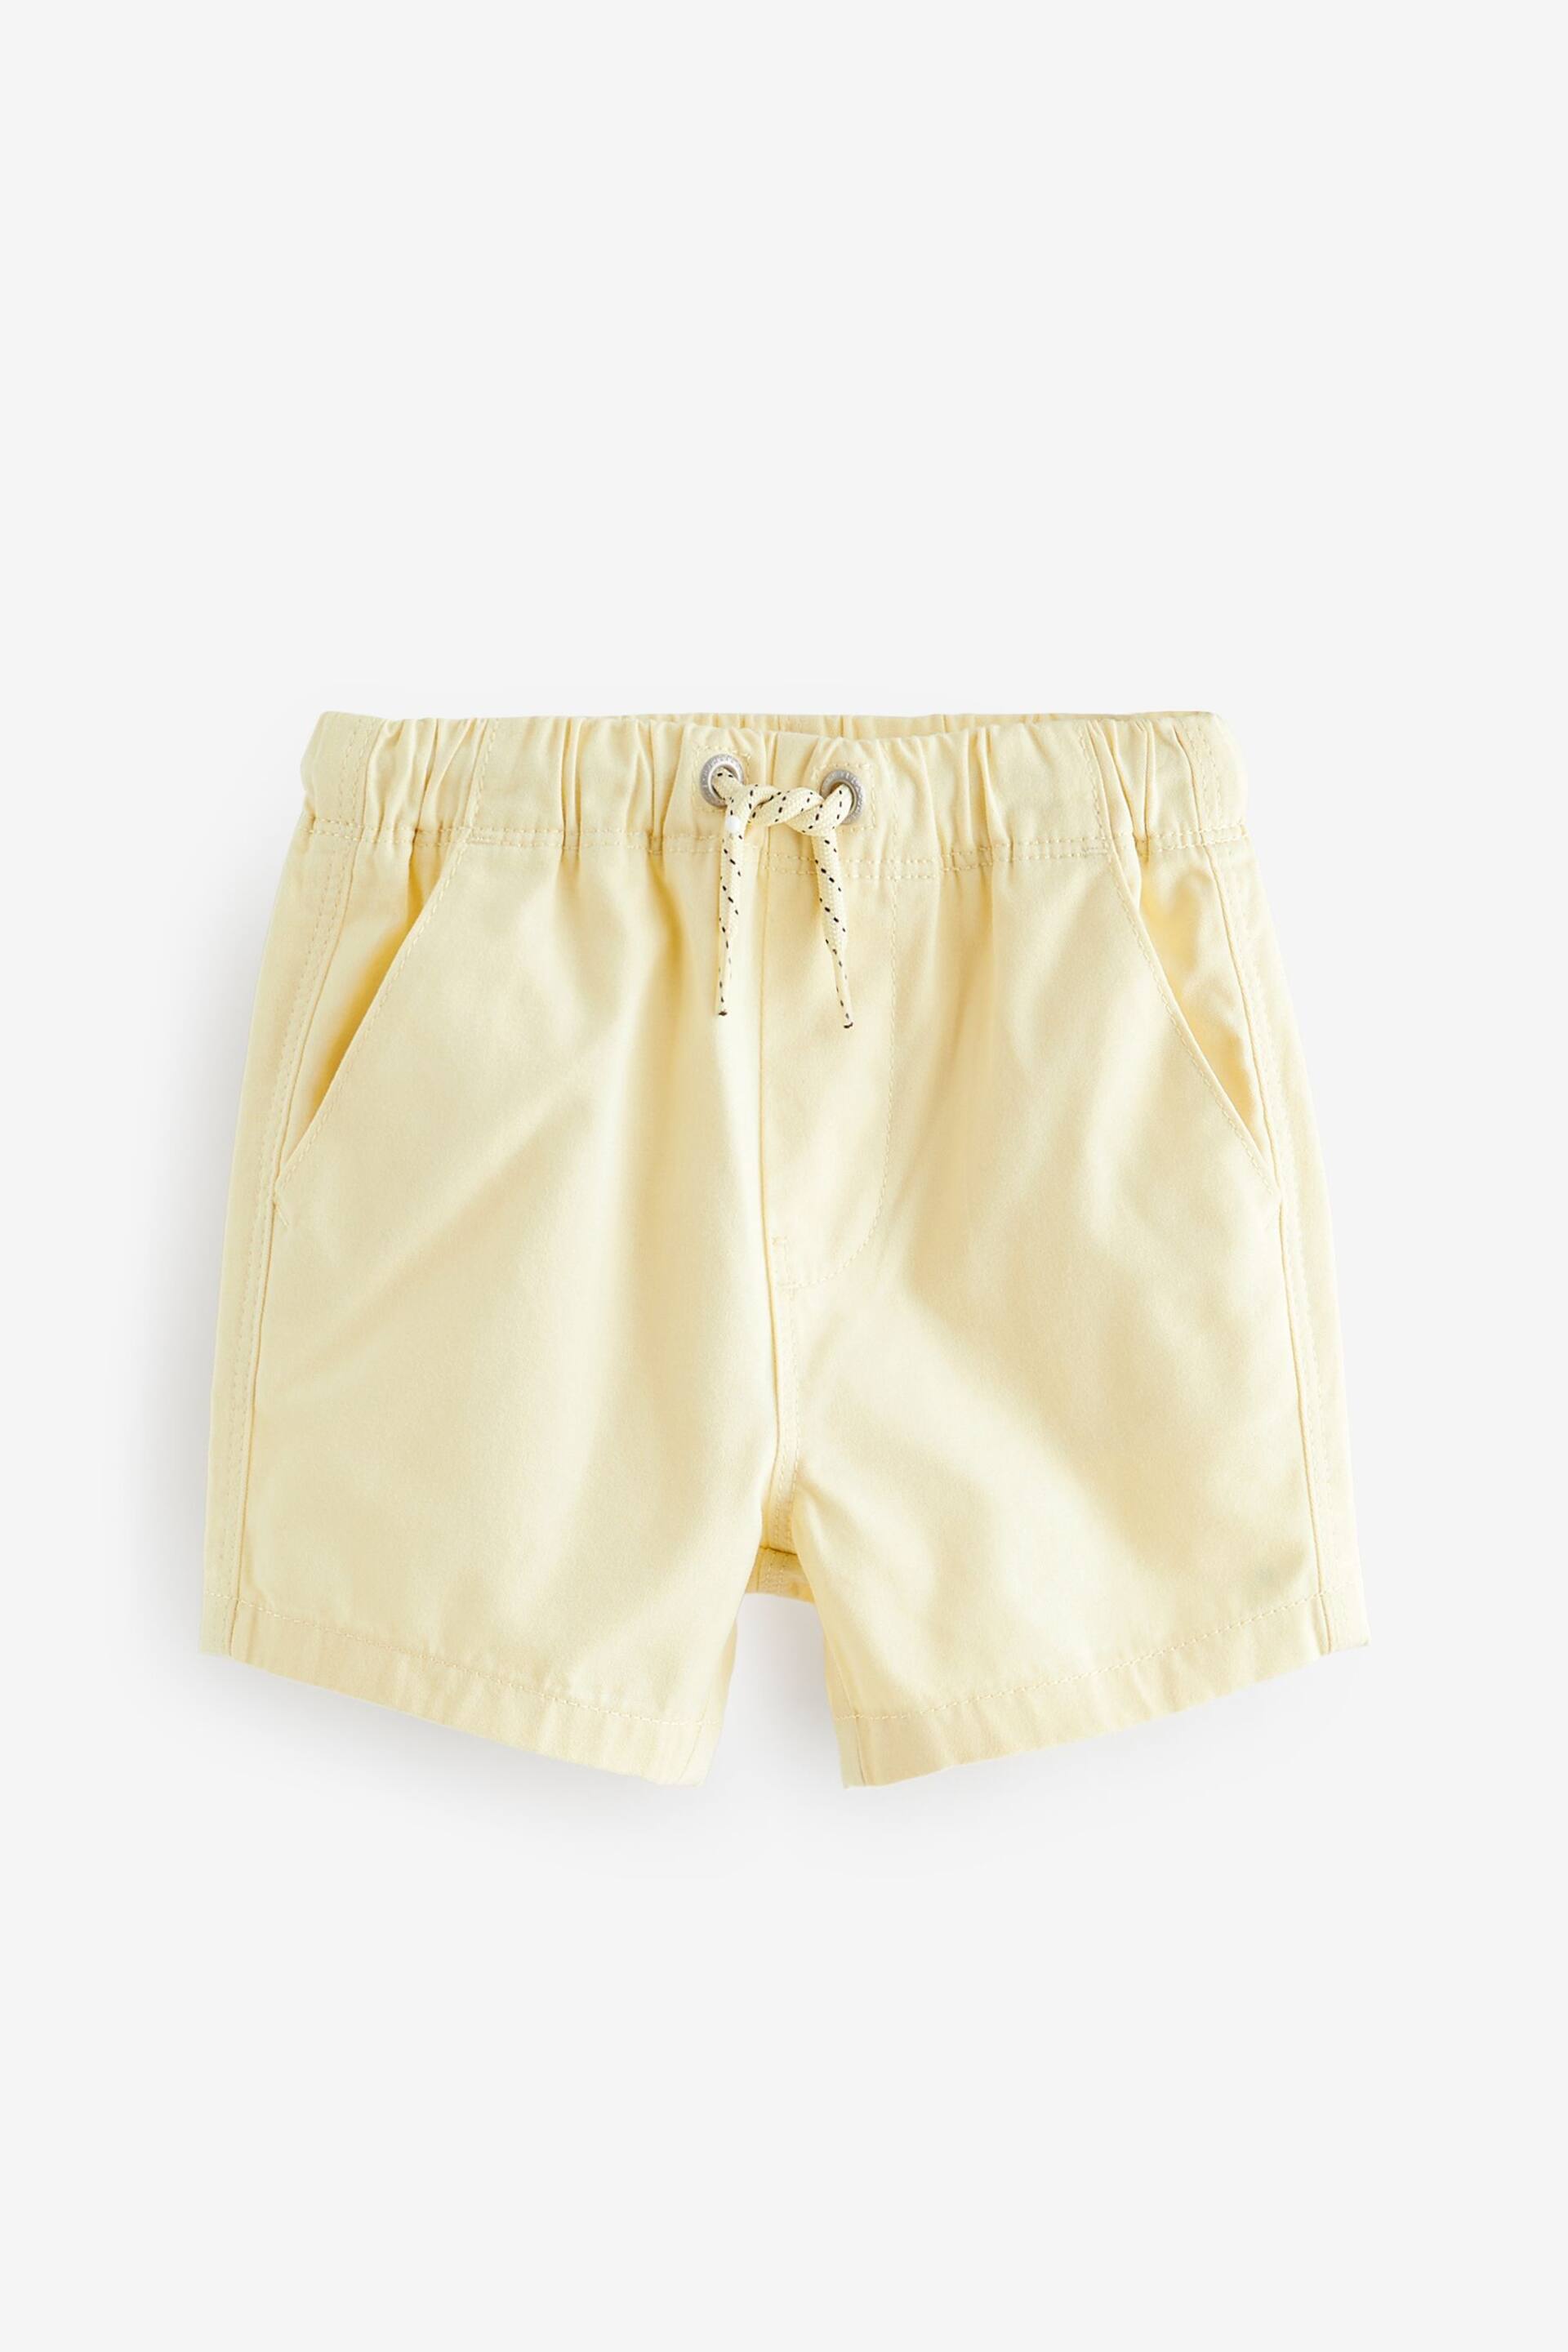 Pale Yellow Pull-On Shorts (3mths-7yrs) - Image 5 of 7